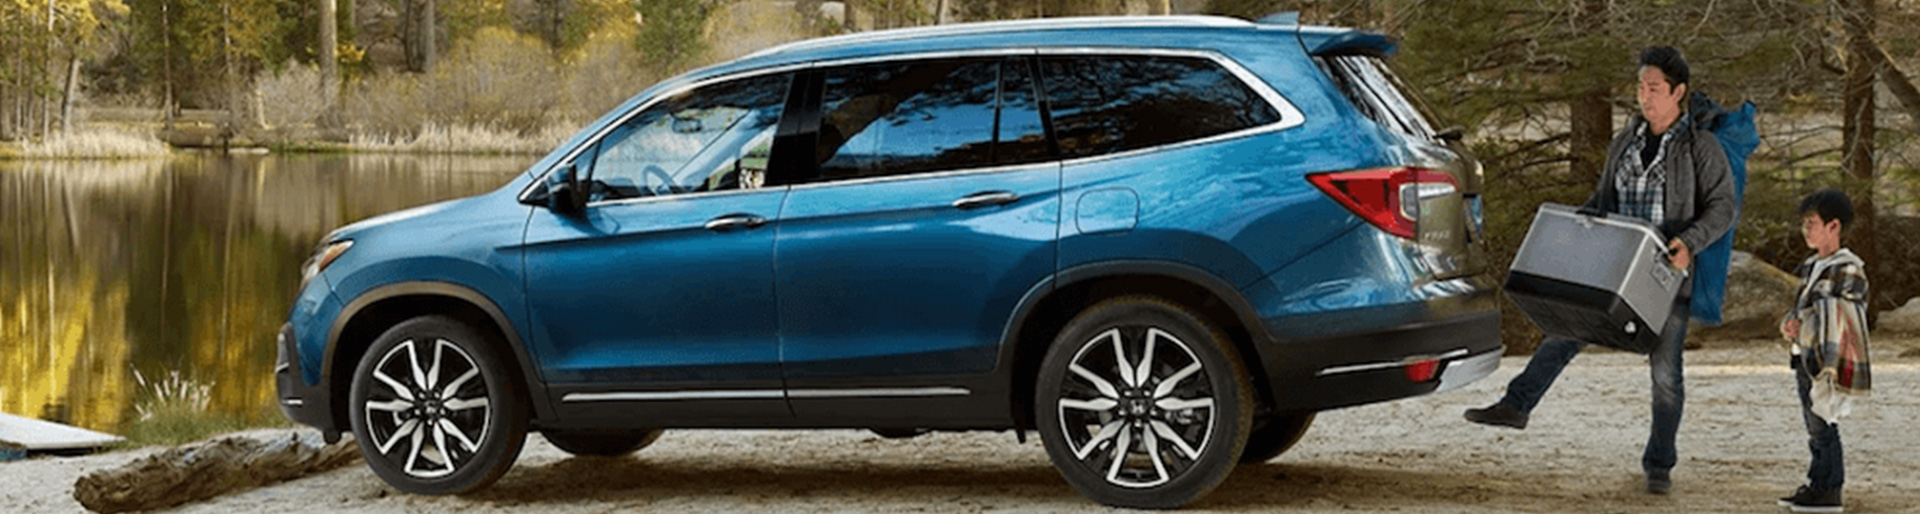 2020 Honda Pilot Overview: Key Features, Specs, and More